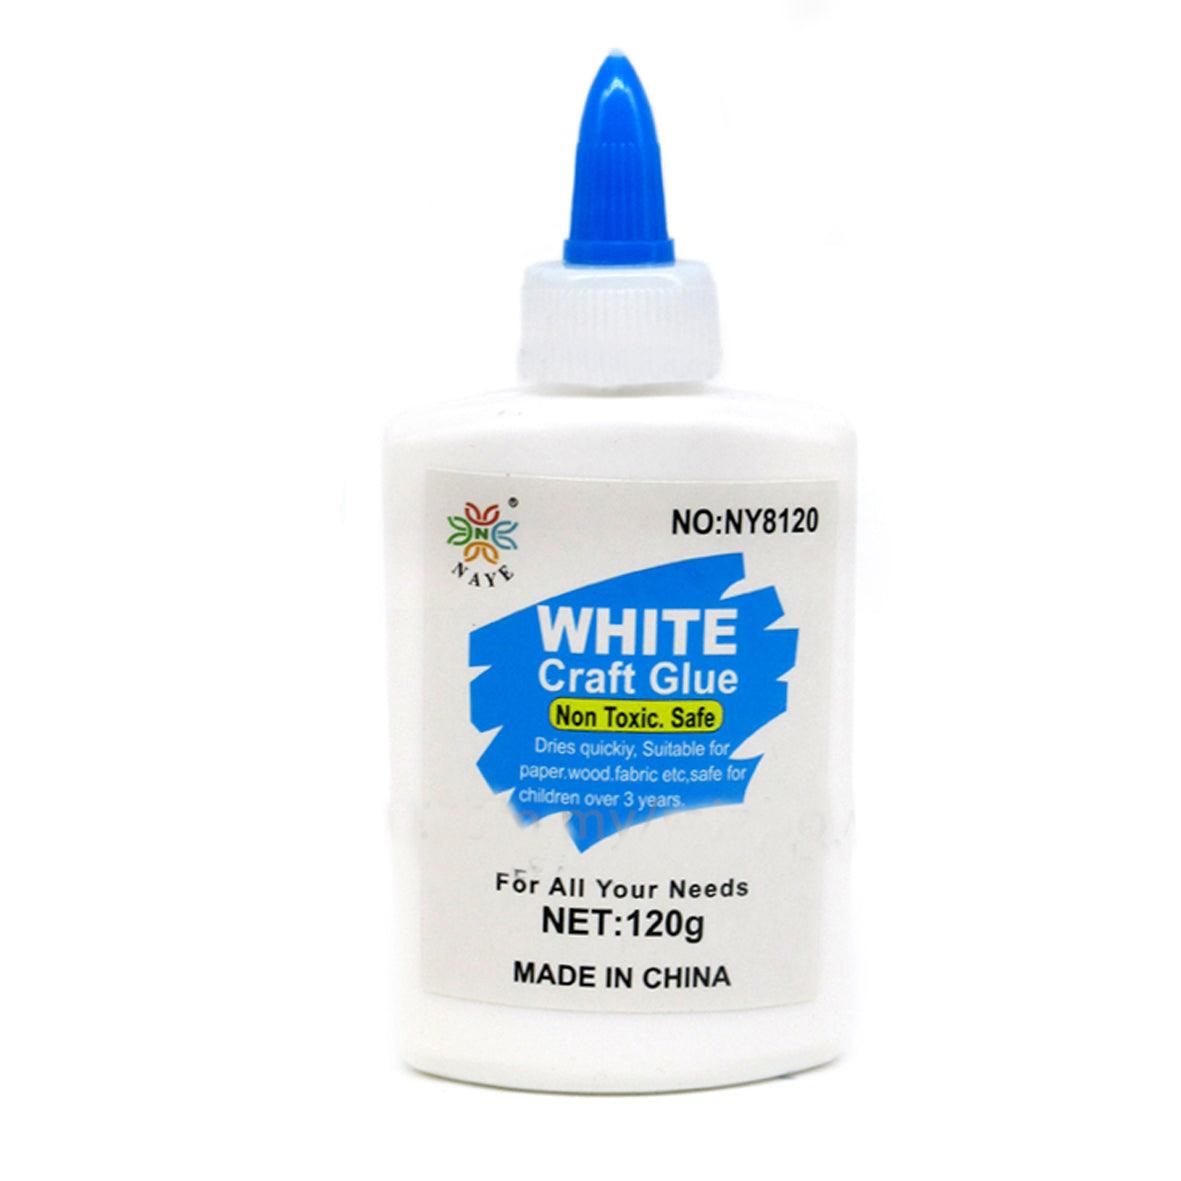 White Craft Glue NY8120 / Q-82 - Karout Online -Karout Online Shopping In lebanon - Karout Express Delivery 